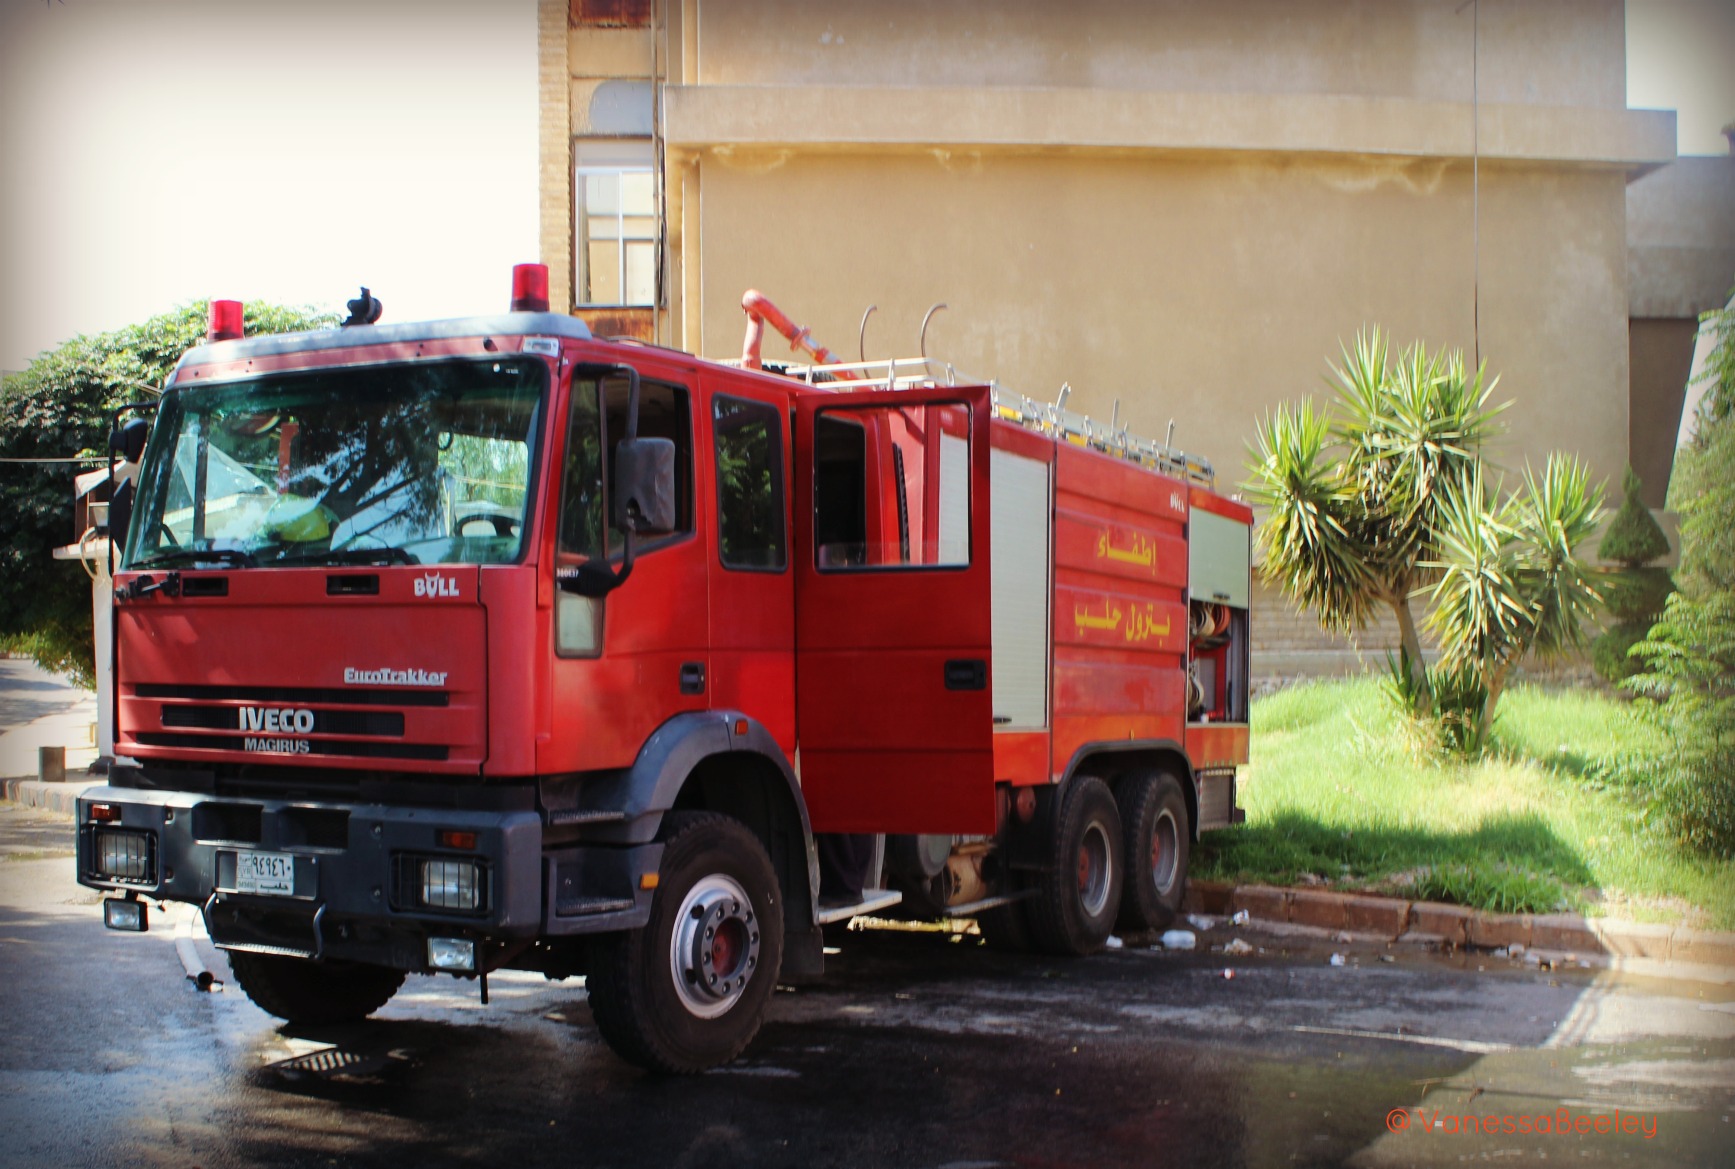 One of the real Syria Civil Defense’s fire engines parked at their unit in western Aleppo. (Photo: Vanessa Beeley)